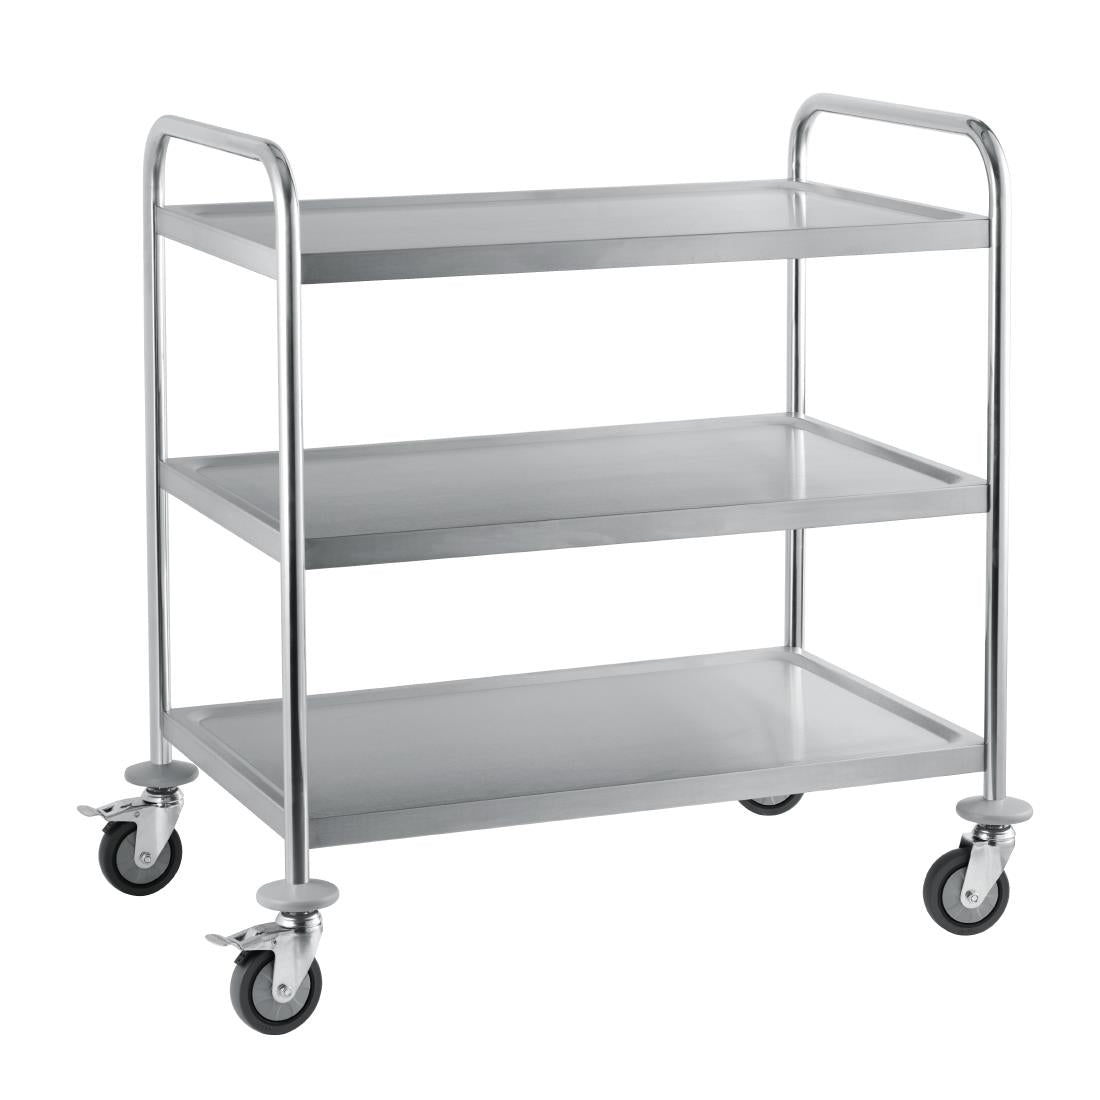 Craven Stainless Steel 3 Tier Clearing Trolley JD Catering Equipment Solutions Ltd